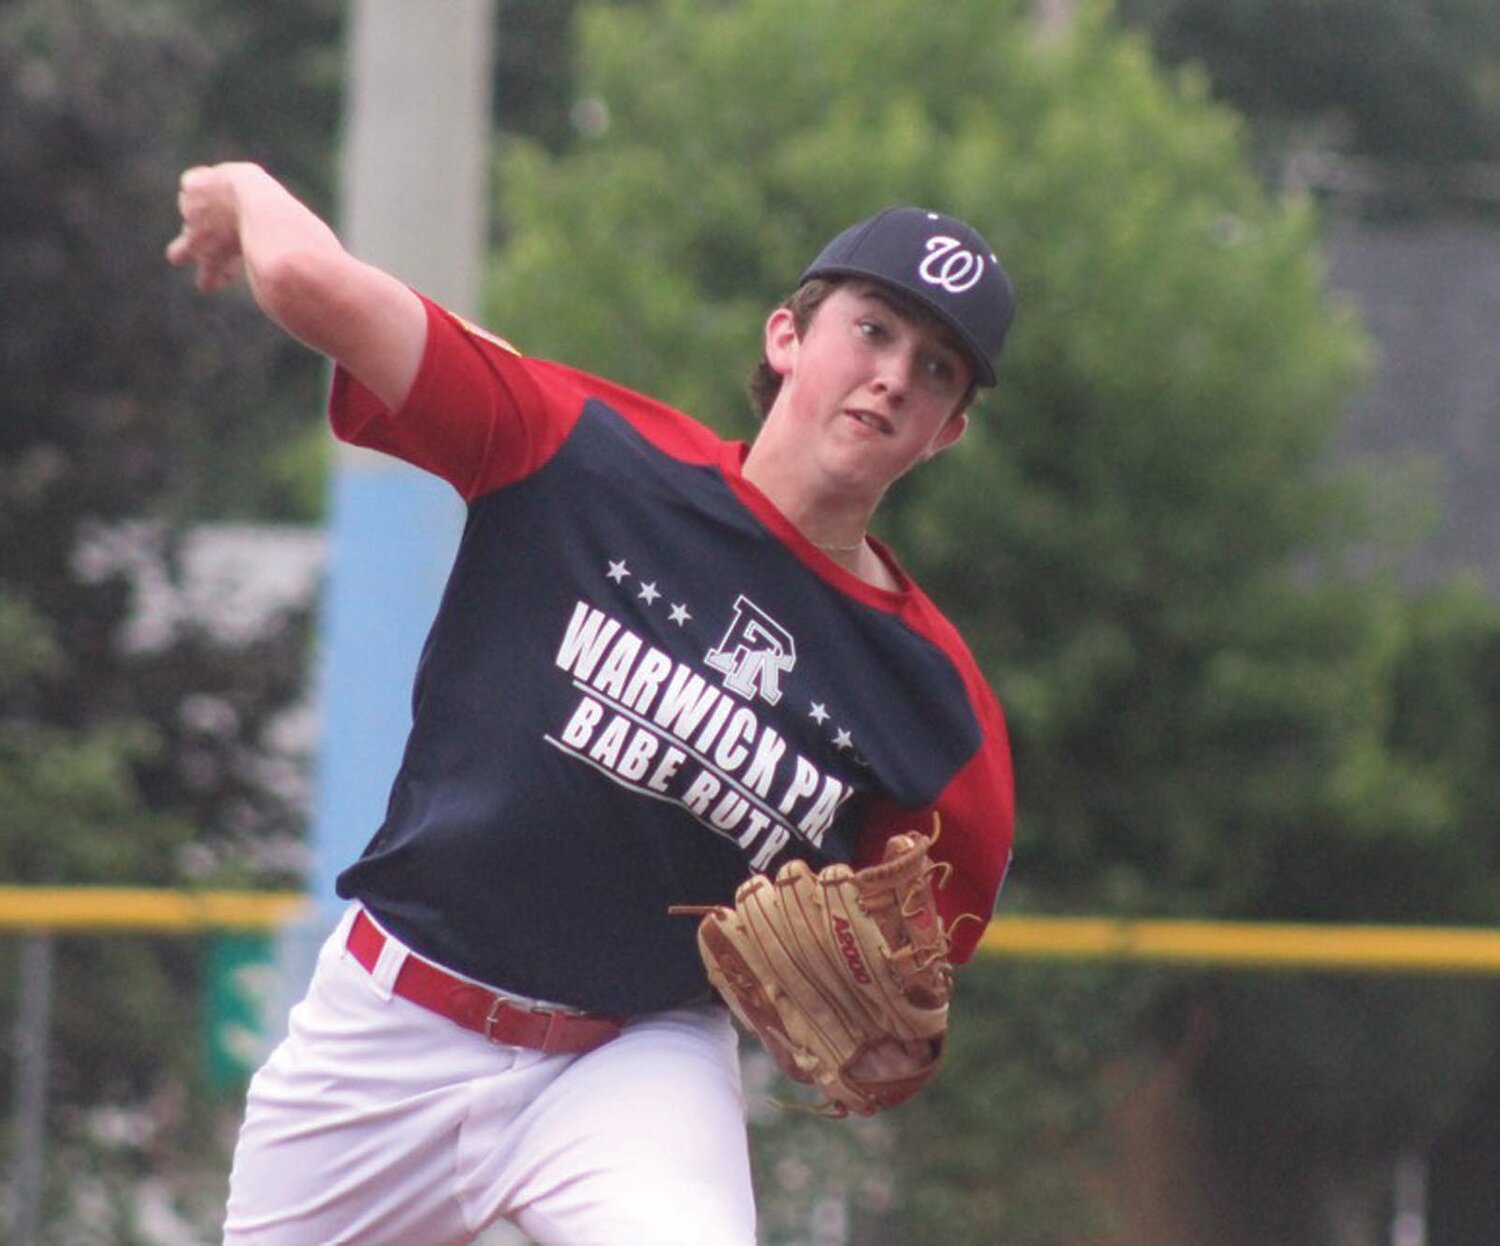 ON THE HILL: PAL starting pitcher Aiden Clancey deals in Game 2 of the state championship.